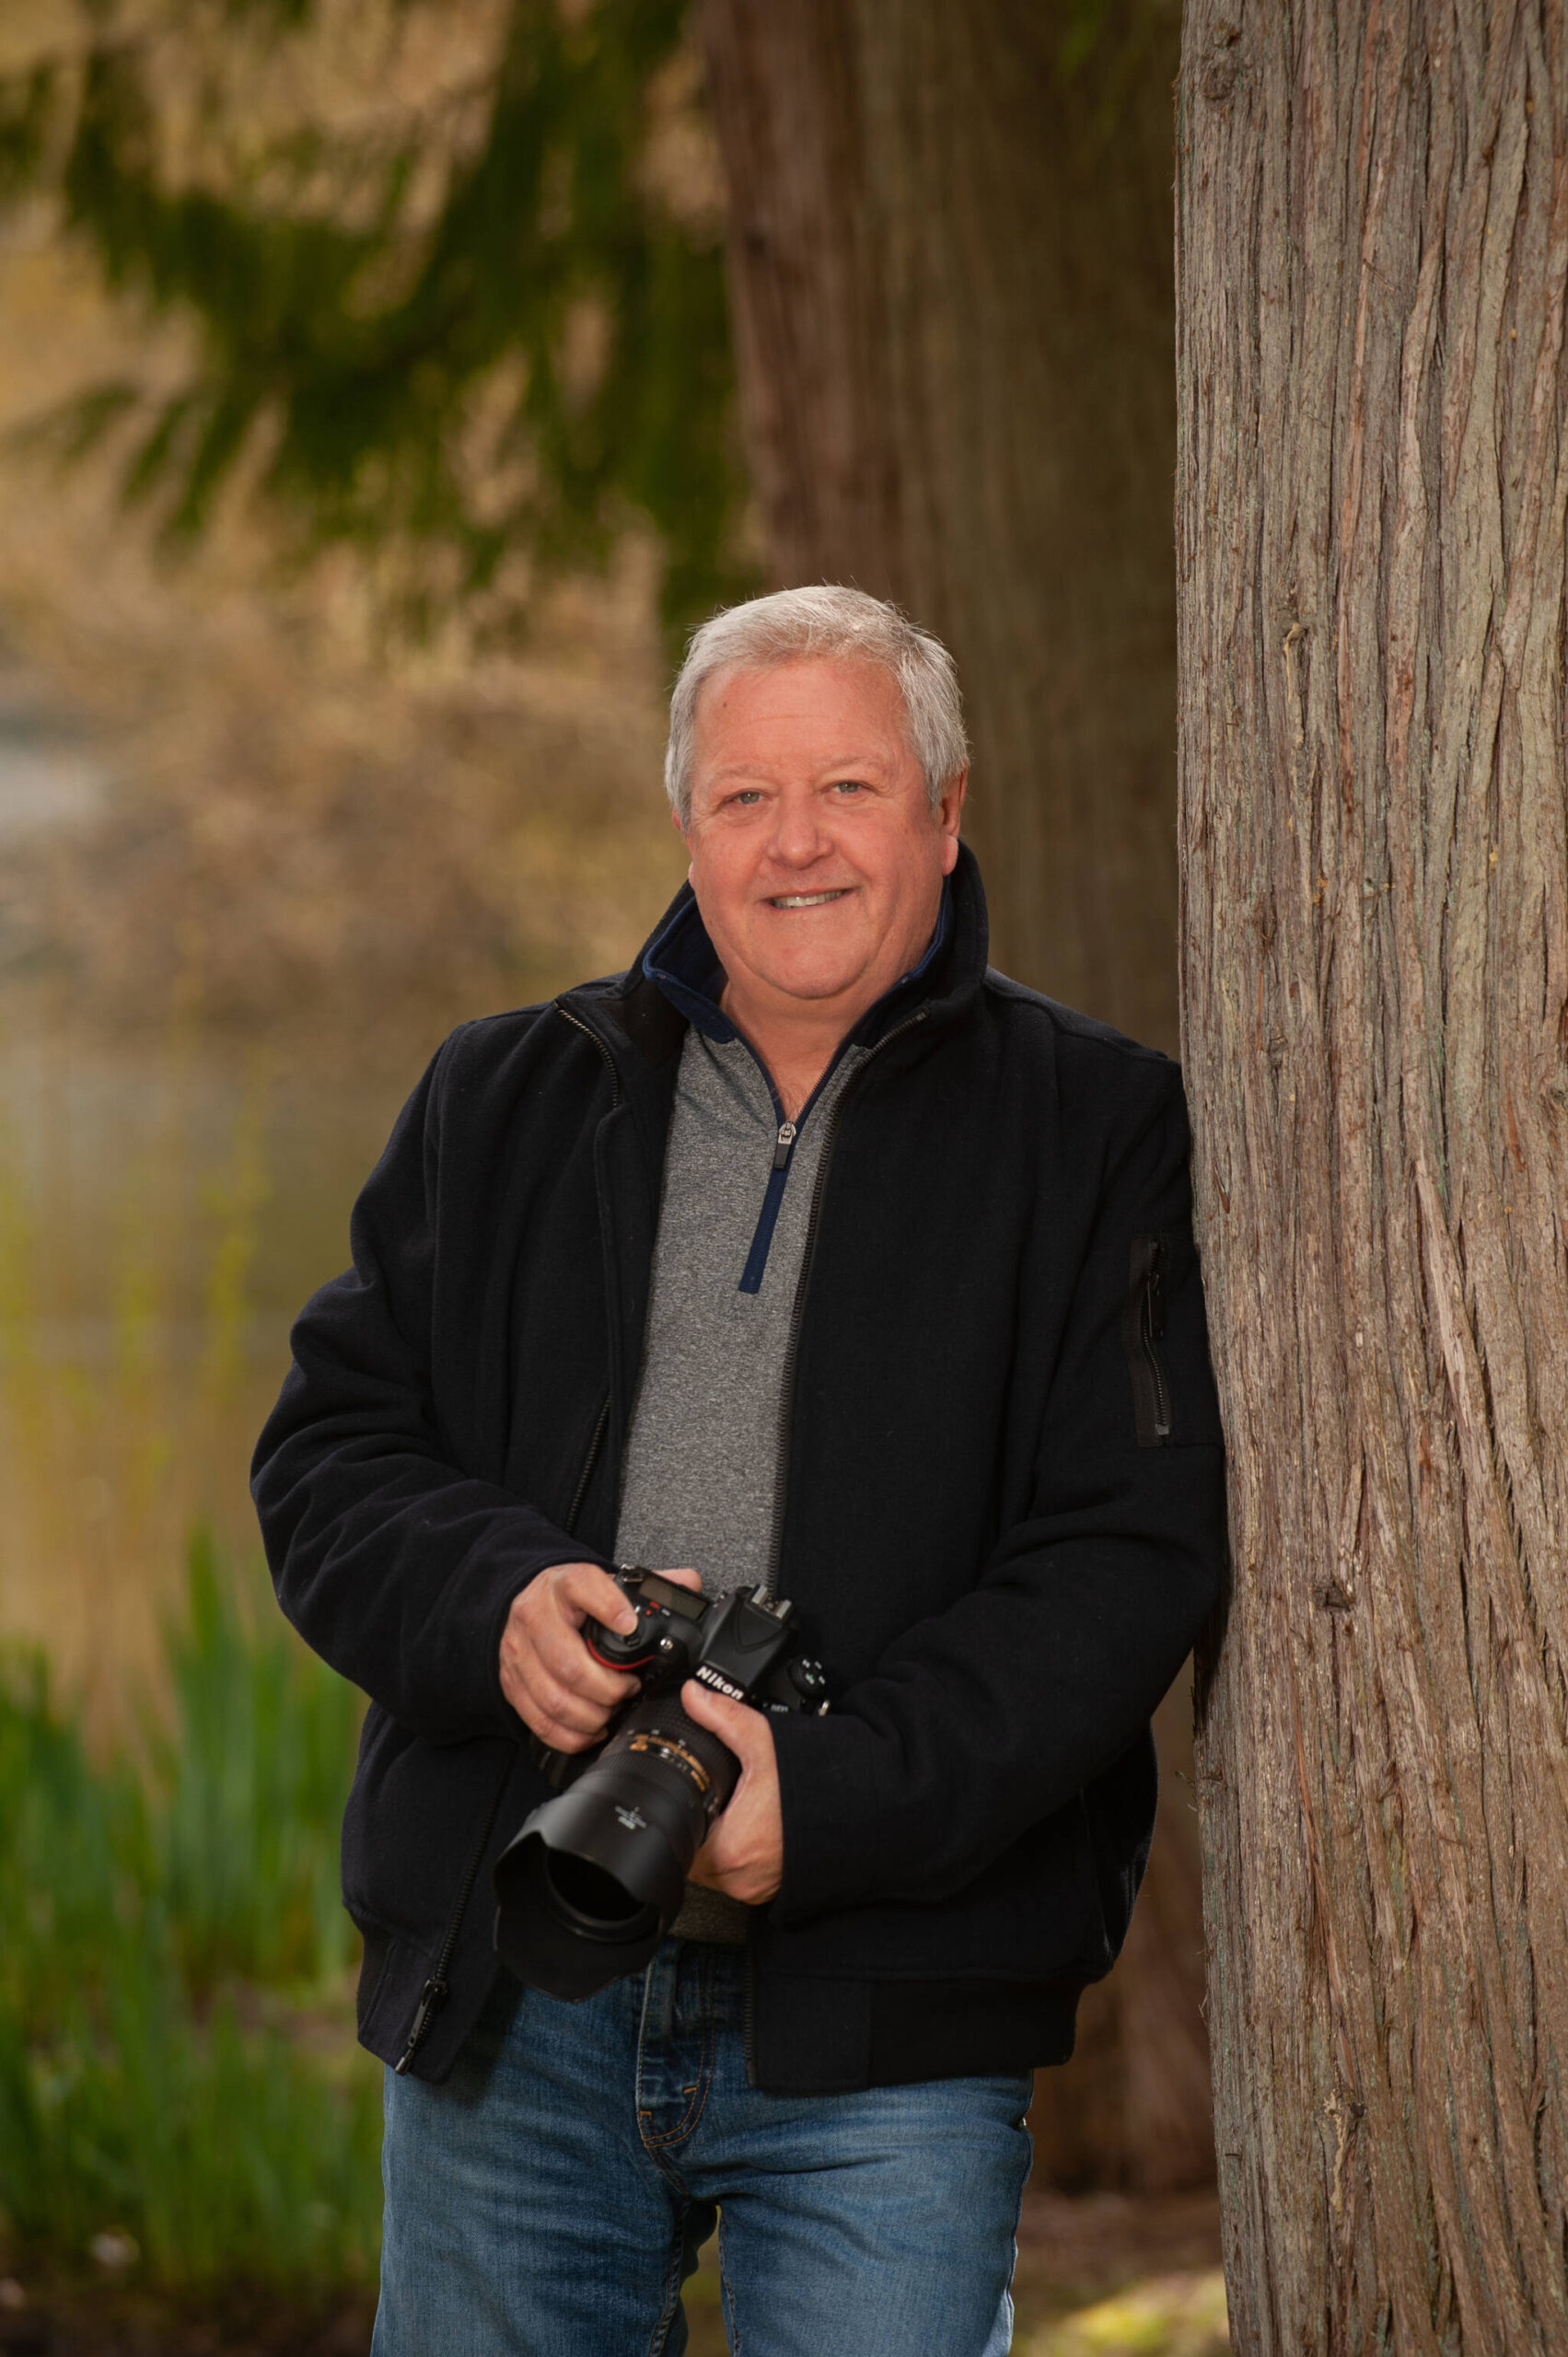 Bruce Hudson has been a Renton-based and South King County-based photographer for 41 years. Photo courtesy of Bruce Hudson.